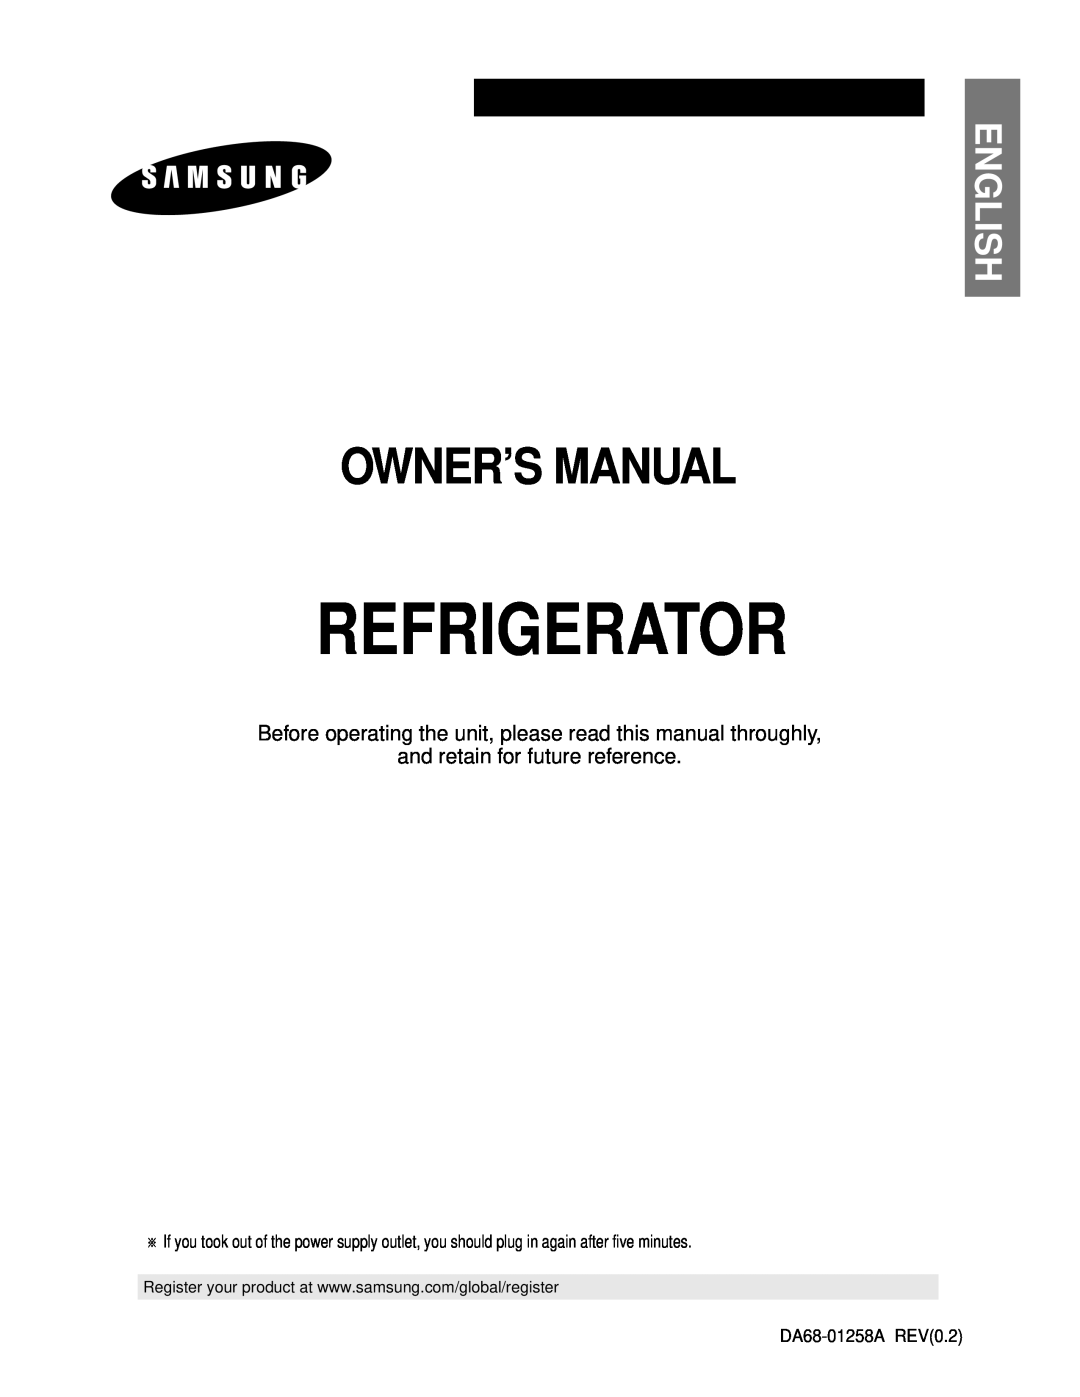 Samsung owner manual Owner’S Manual, and retain for future reference, Refrigerator, English, DA68-01258AREV0.2 